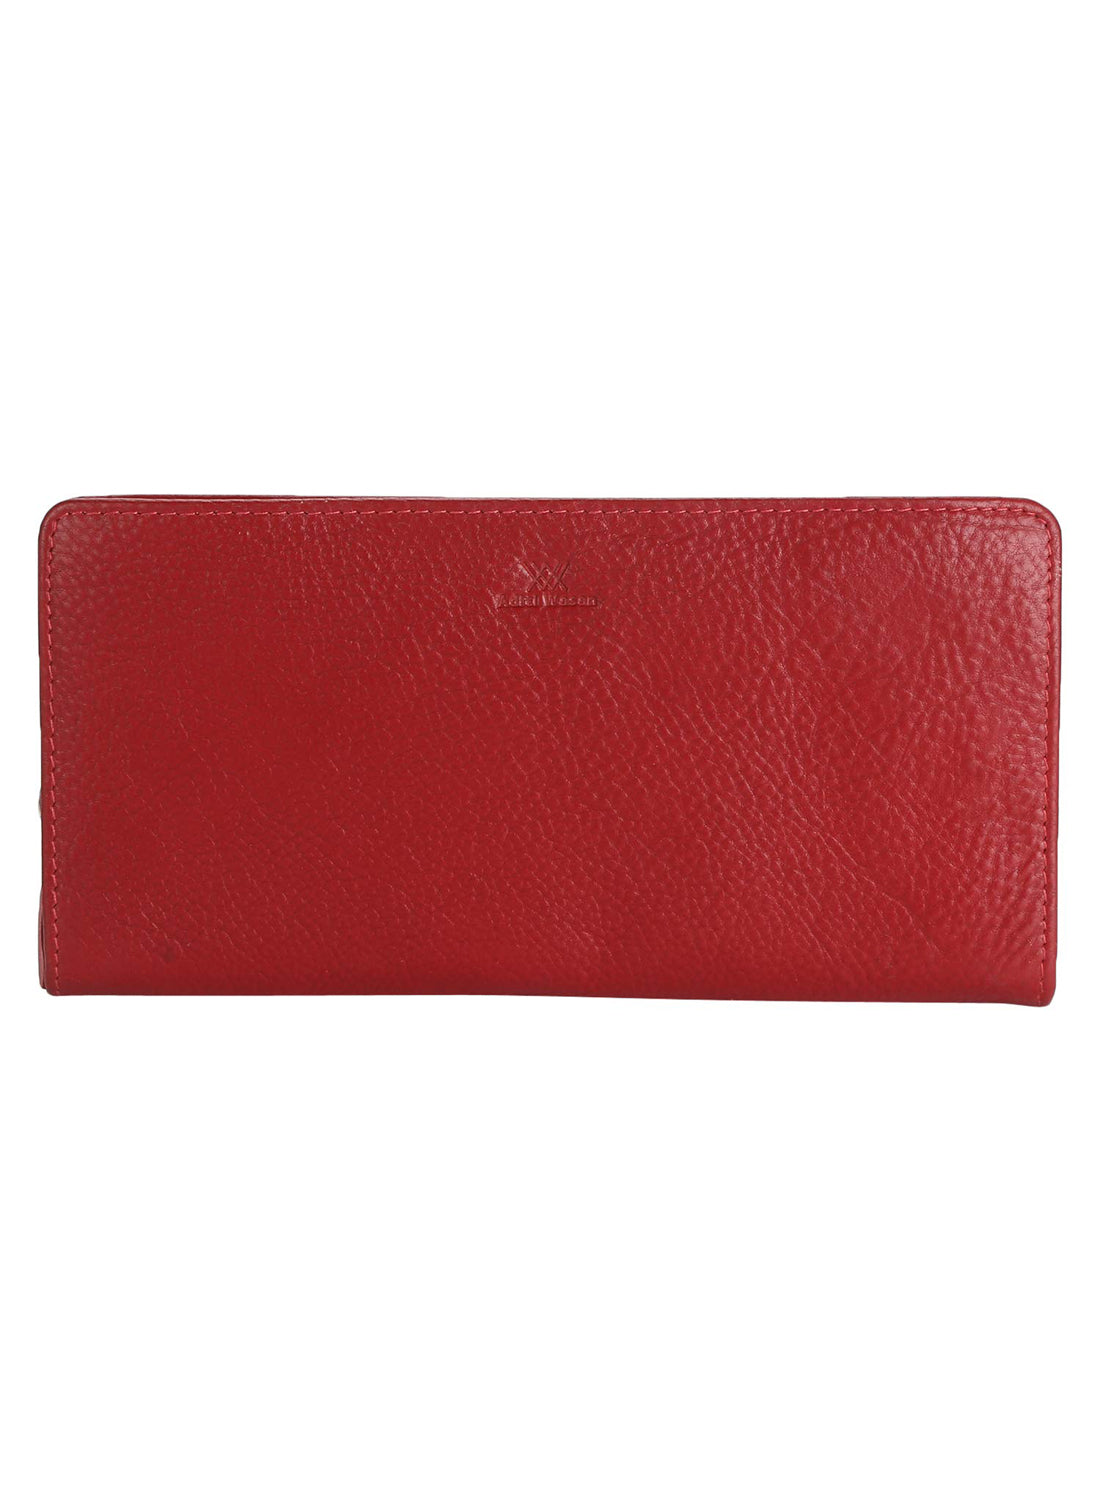 genuine leather maroon gusset clutch